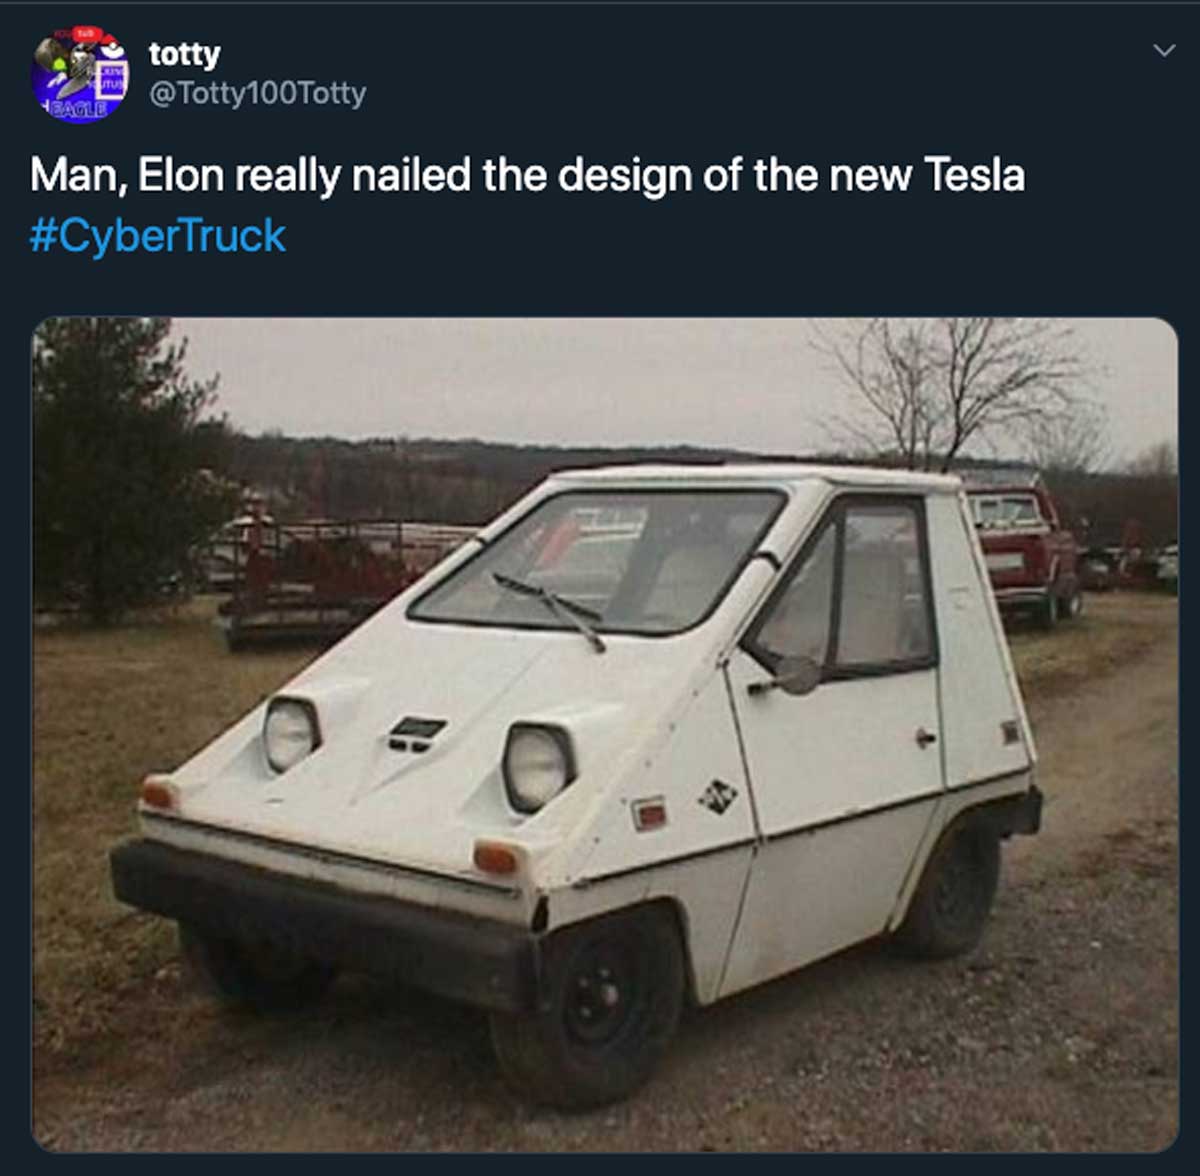 golf carts for sale on craigslist - totty Man, Elon really nailed the design of the new Tesla